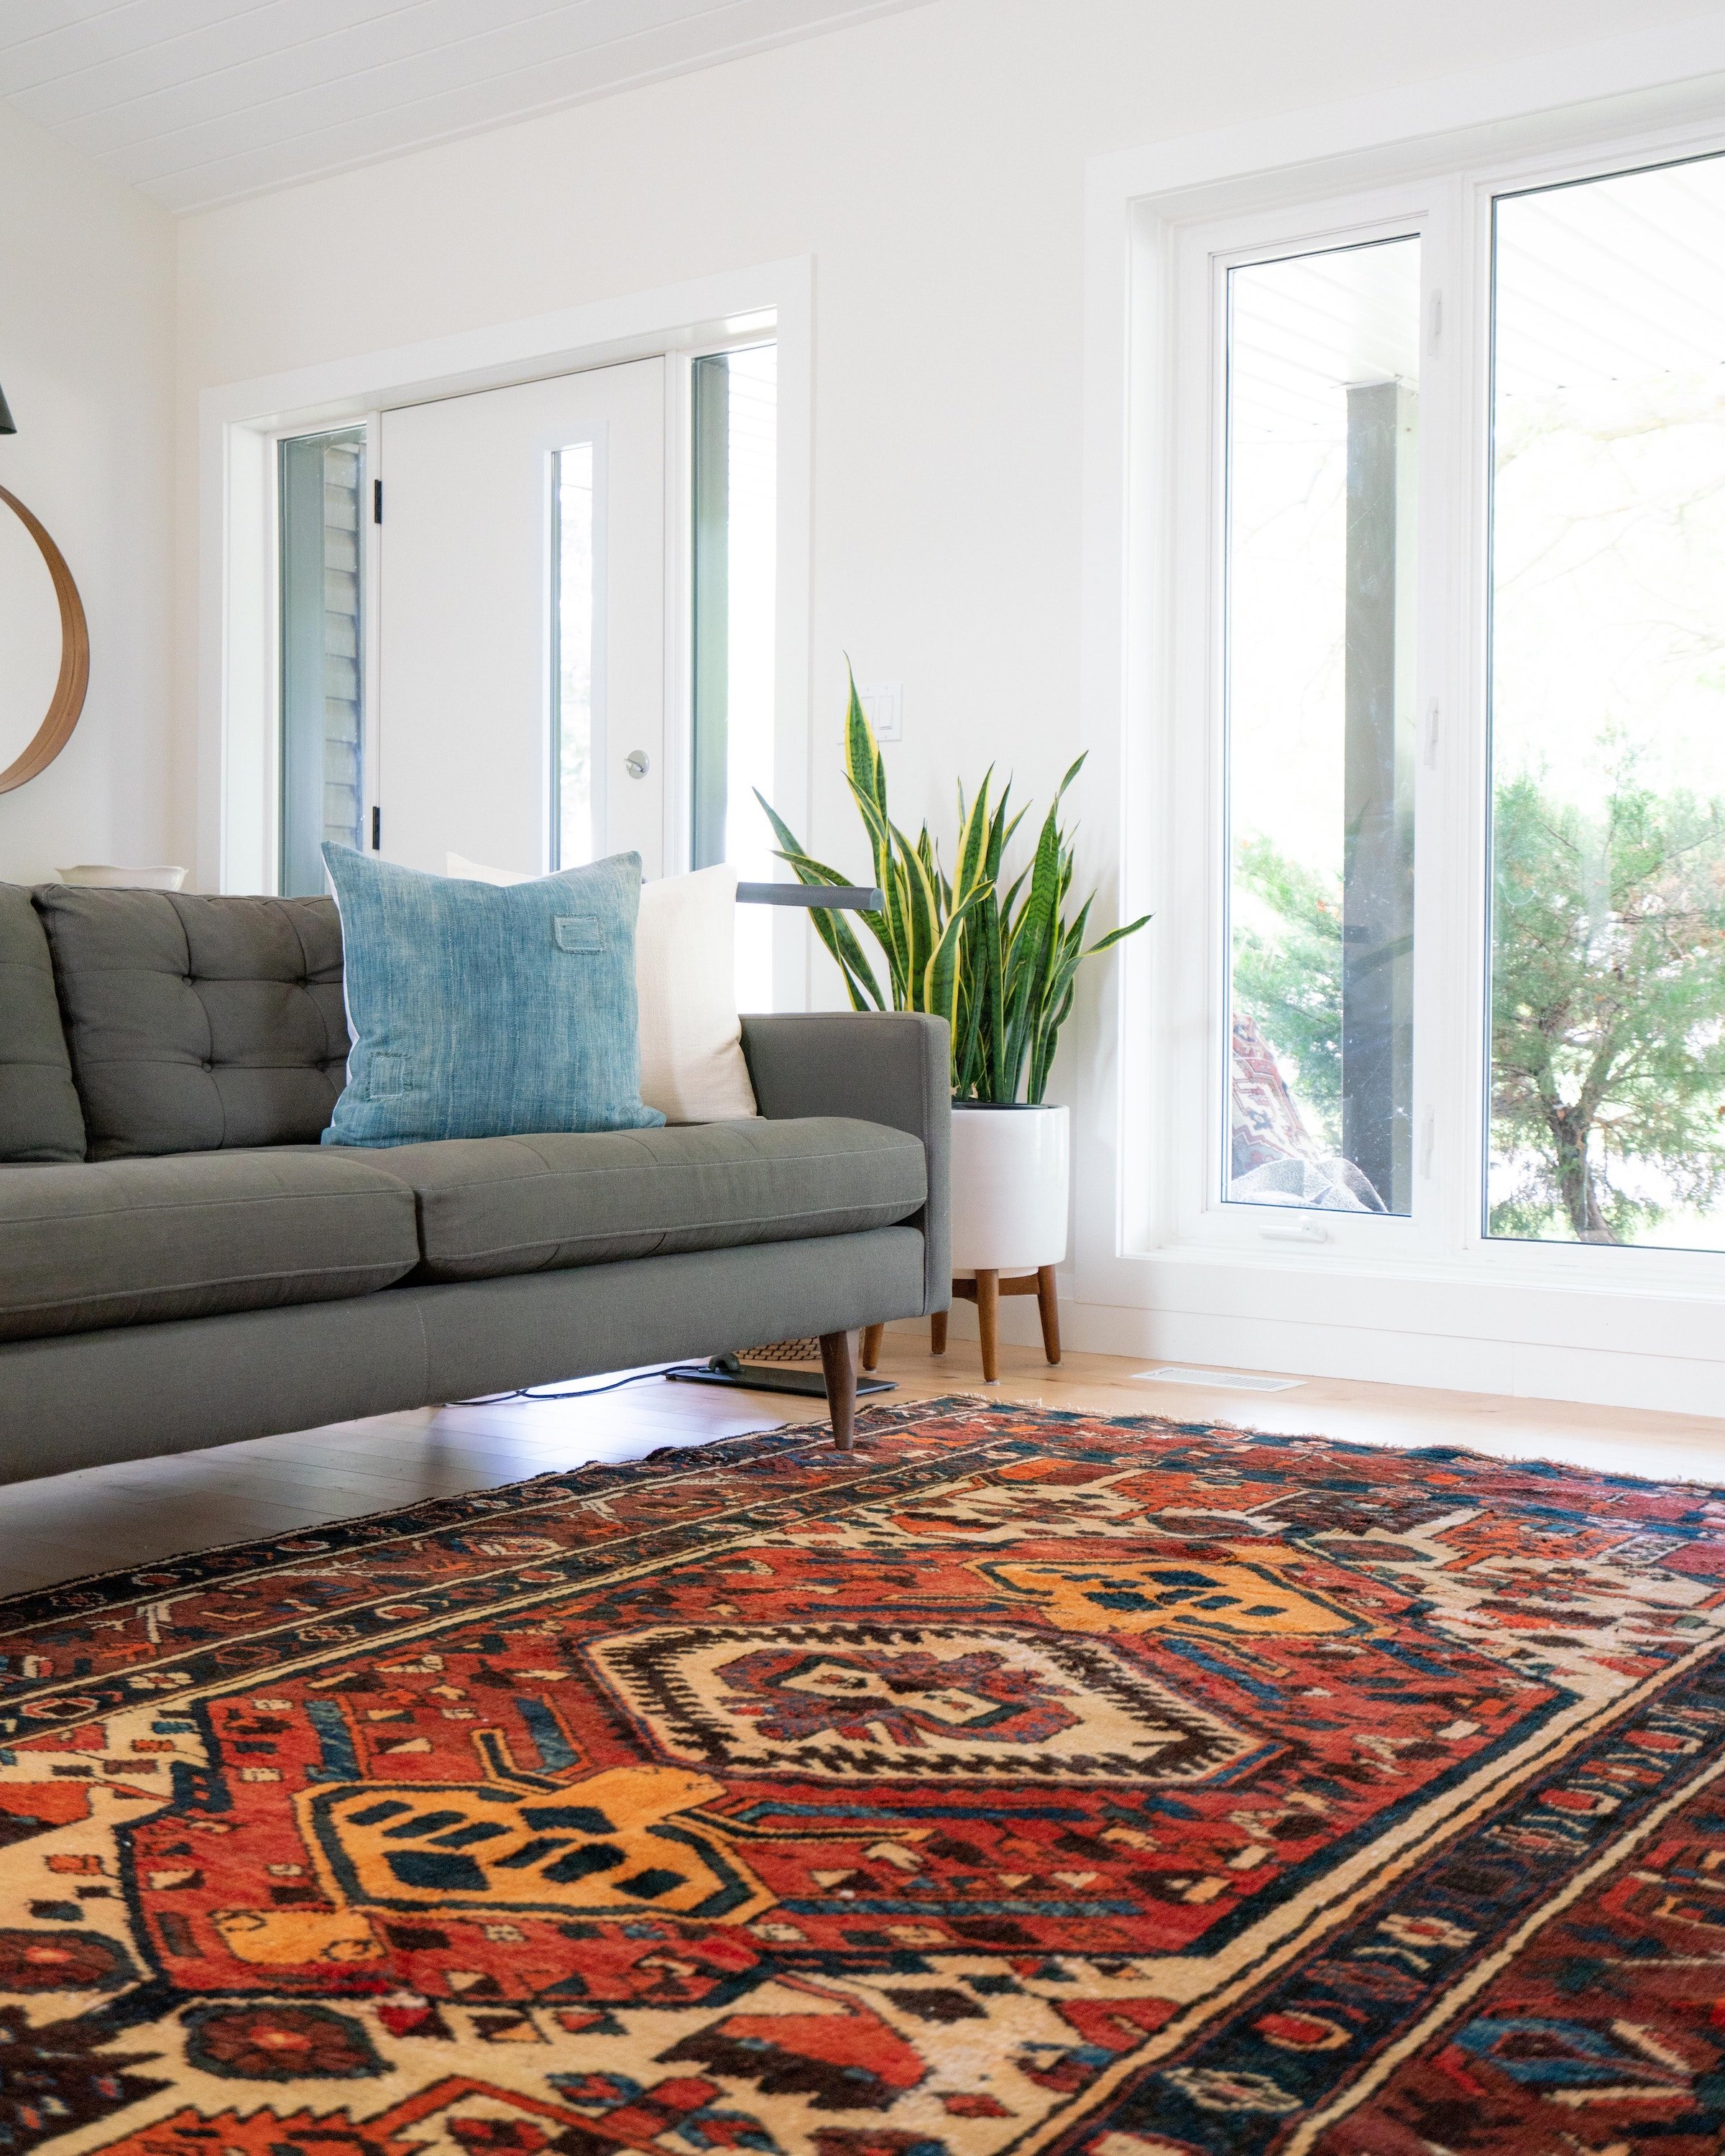 How often you should clean your area rugs.